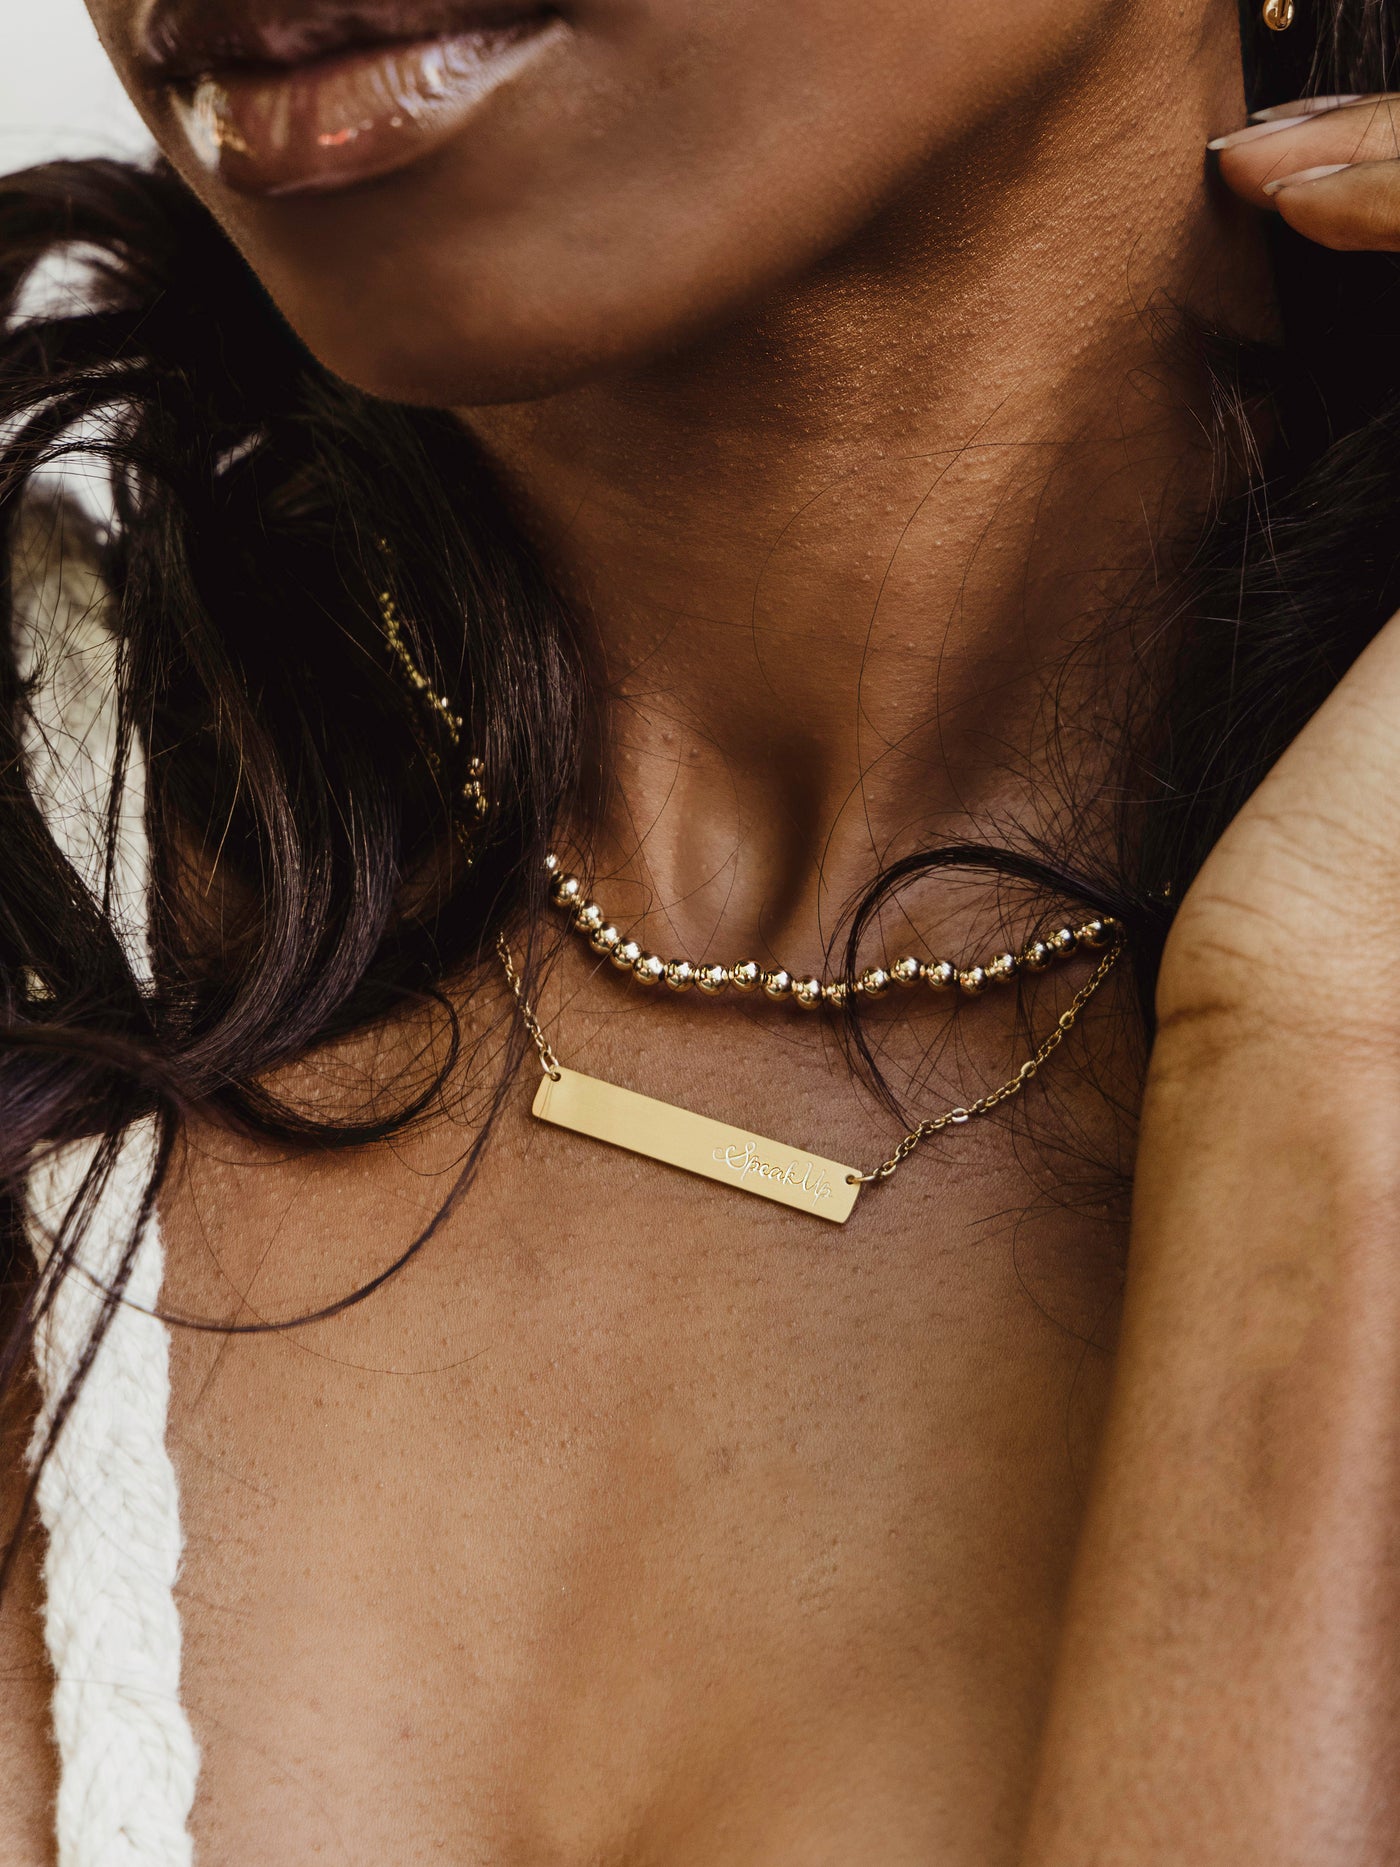 Model wears gold speak up necklace with gold chain and rectangle bar pendant that reads "Speak Up"